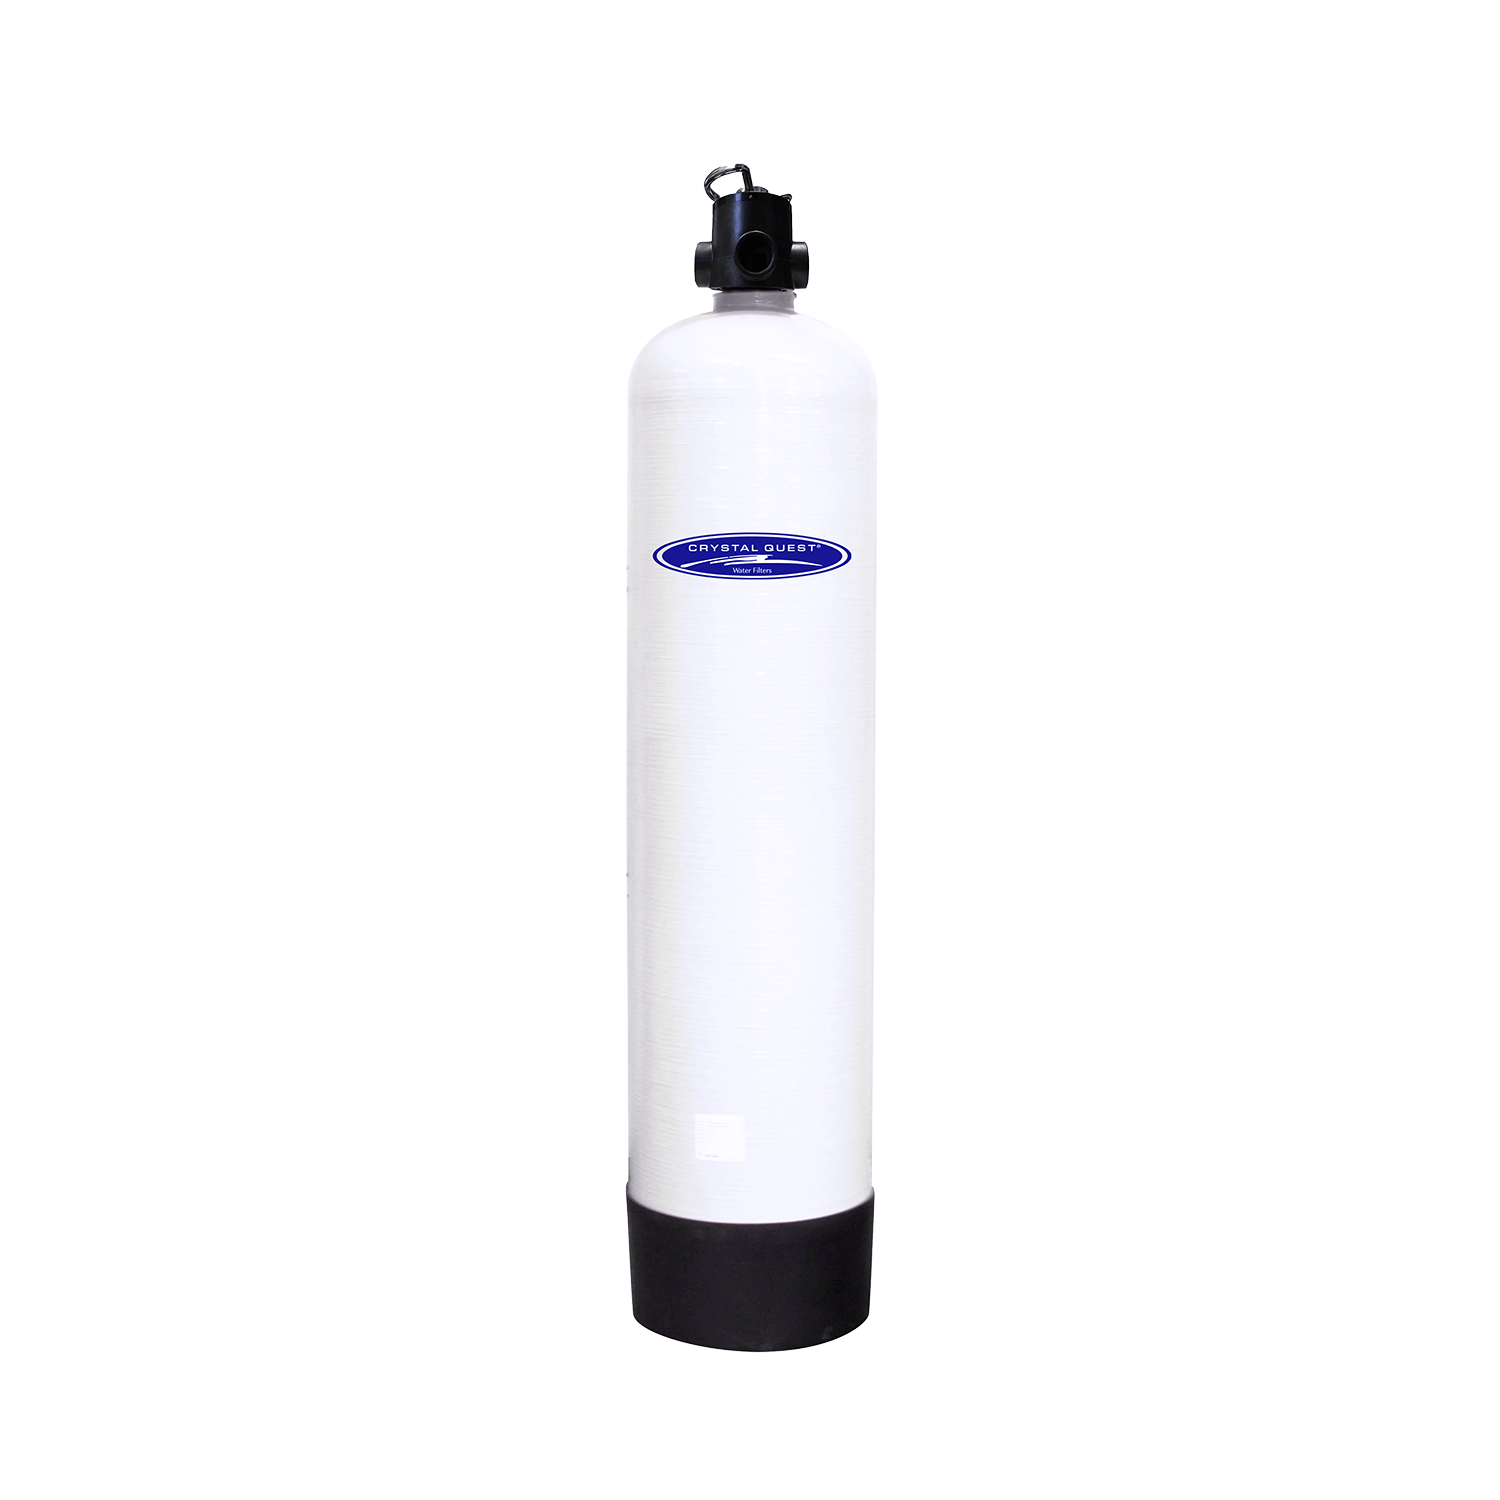 20 GPM / Manual (Downflow w/ Backwash) Demineralizing (DI) Water Filtration System - Commercial - Crystal Quest